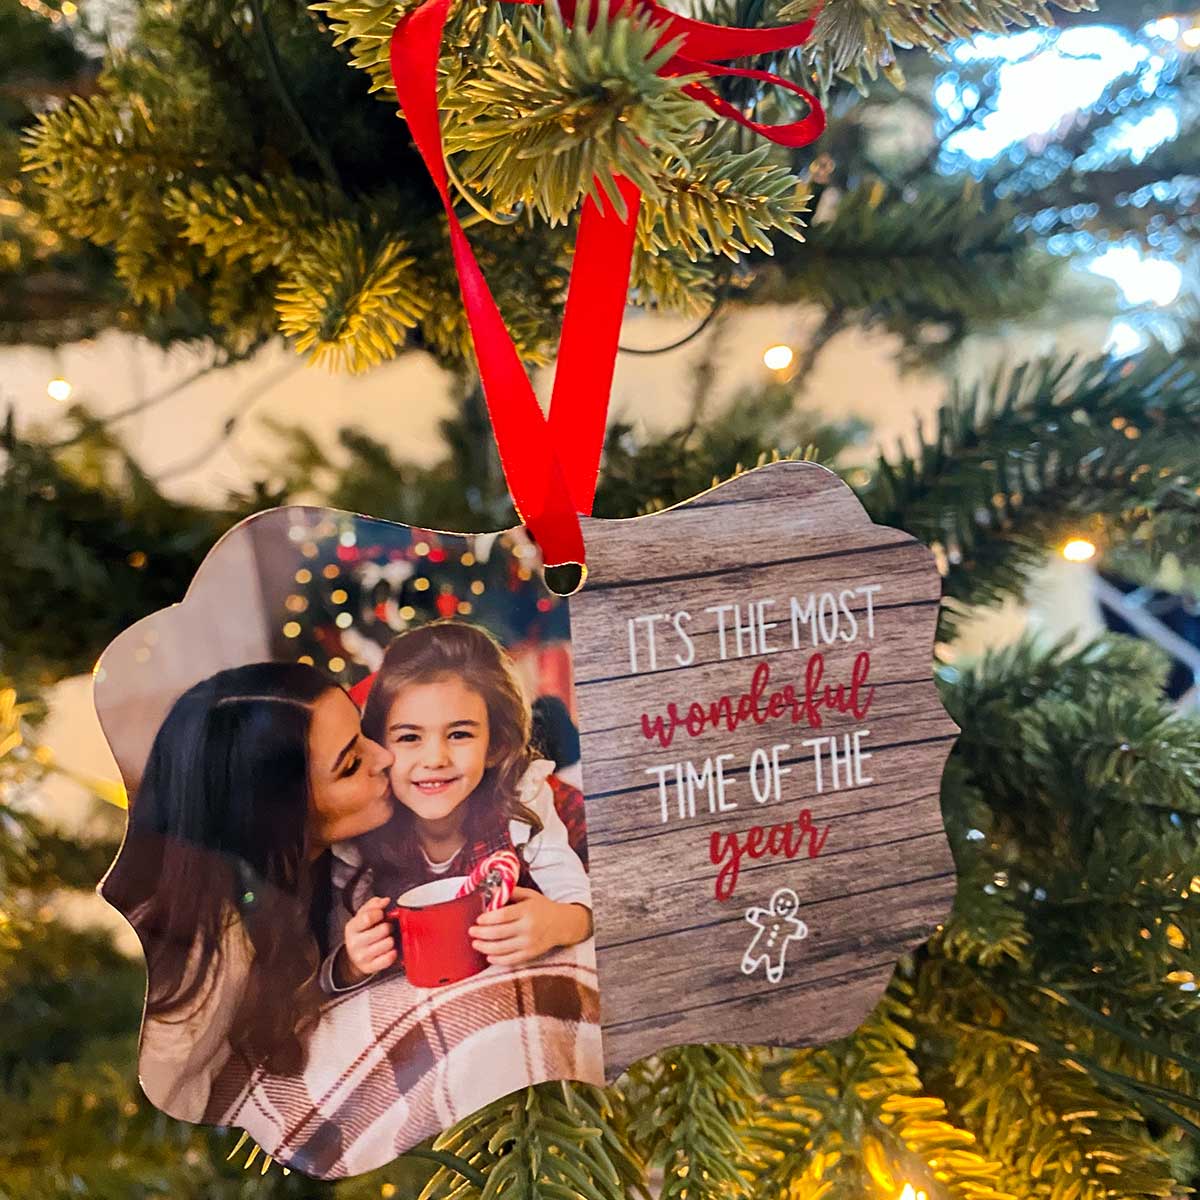 Most Wonderful Time of The Year Photo Upload Christmas Ornament